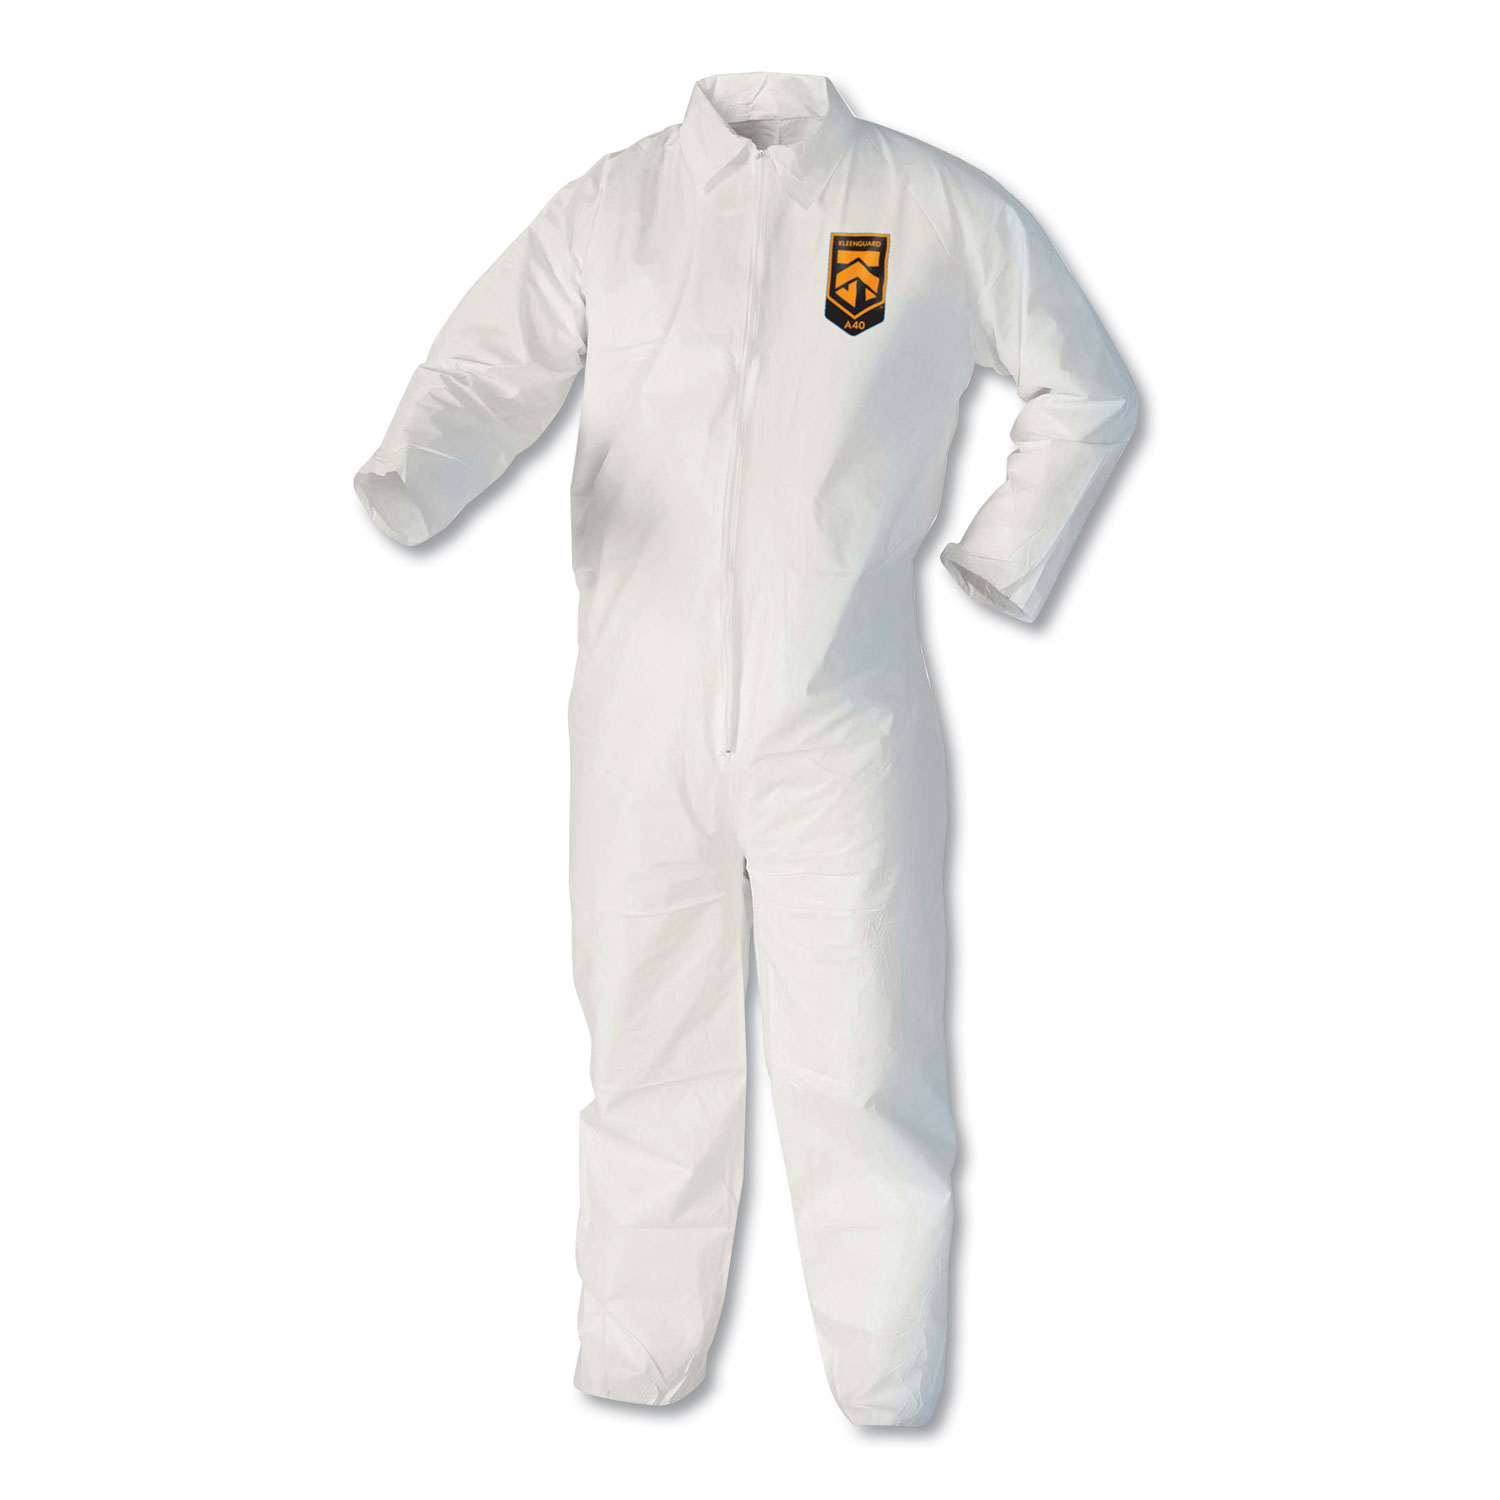  KleenGuard 44304 A40 Coveralls, X-Large, White (KCC44304) 